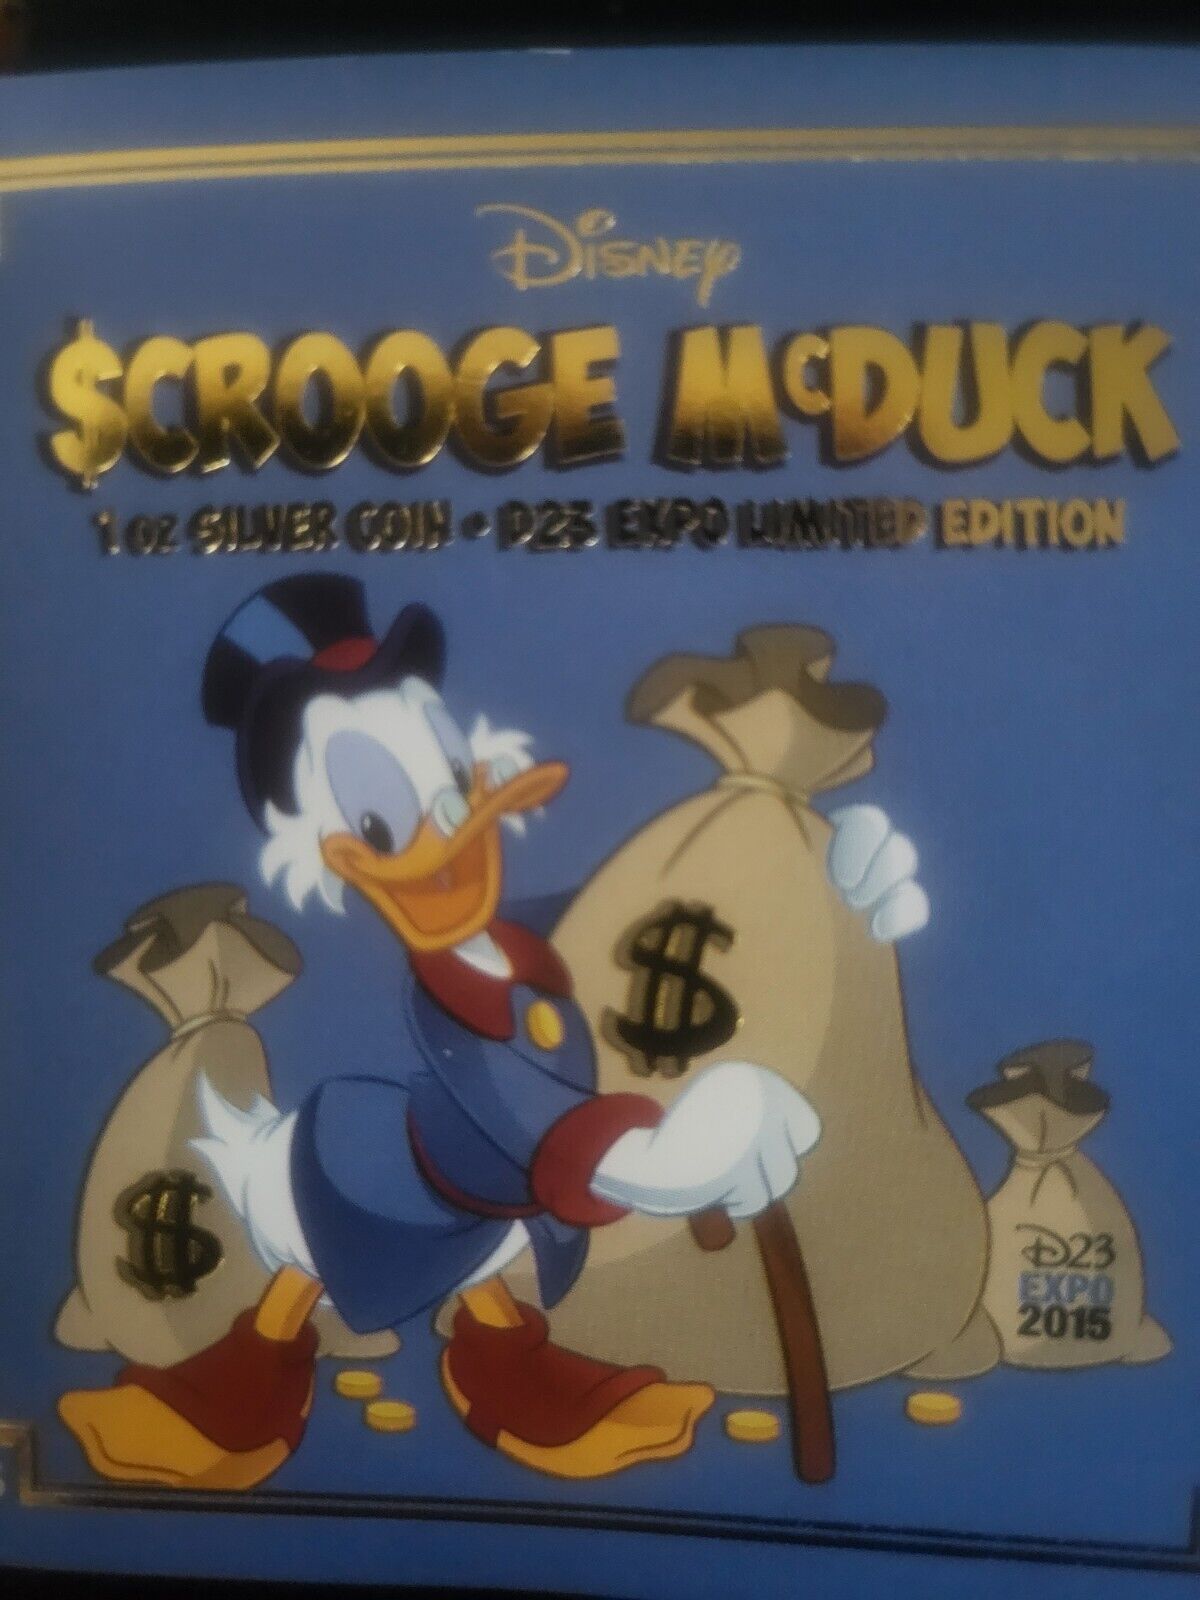 D23 Expo 2015 version - Scrooge McDuck NIUE LE 1oz $2 COIN